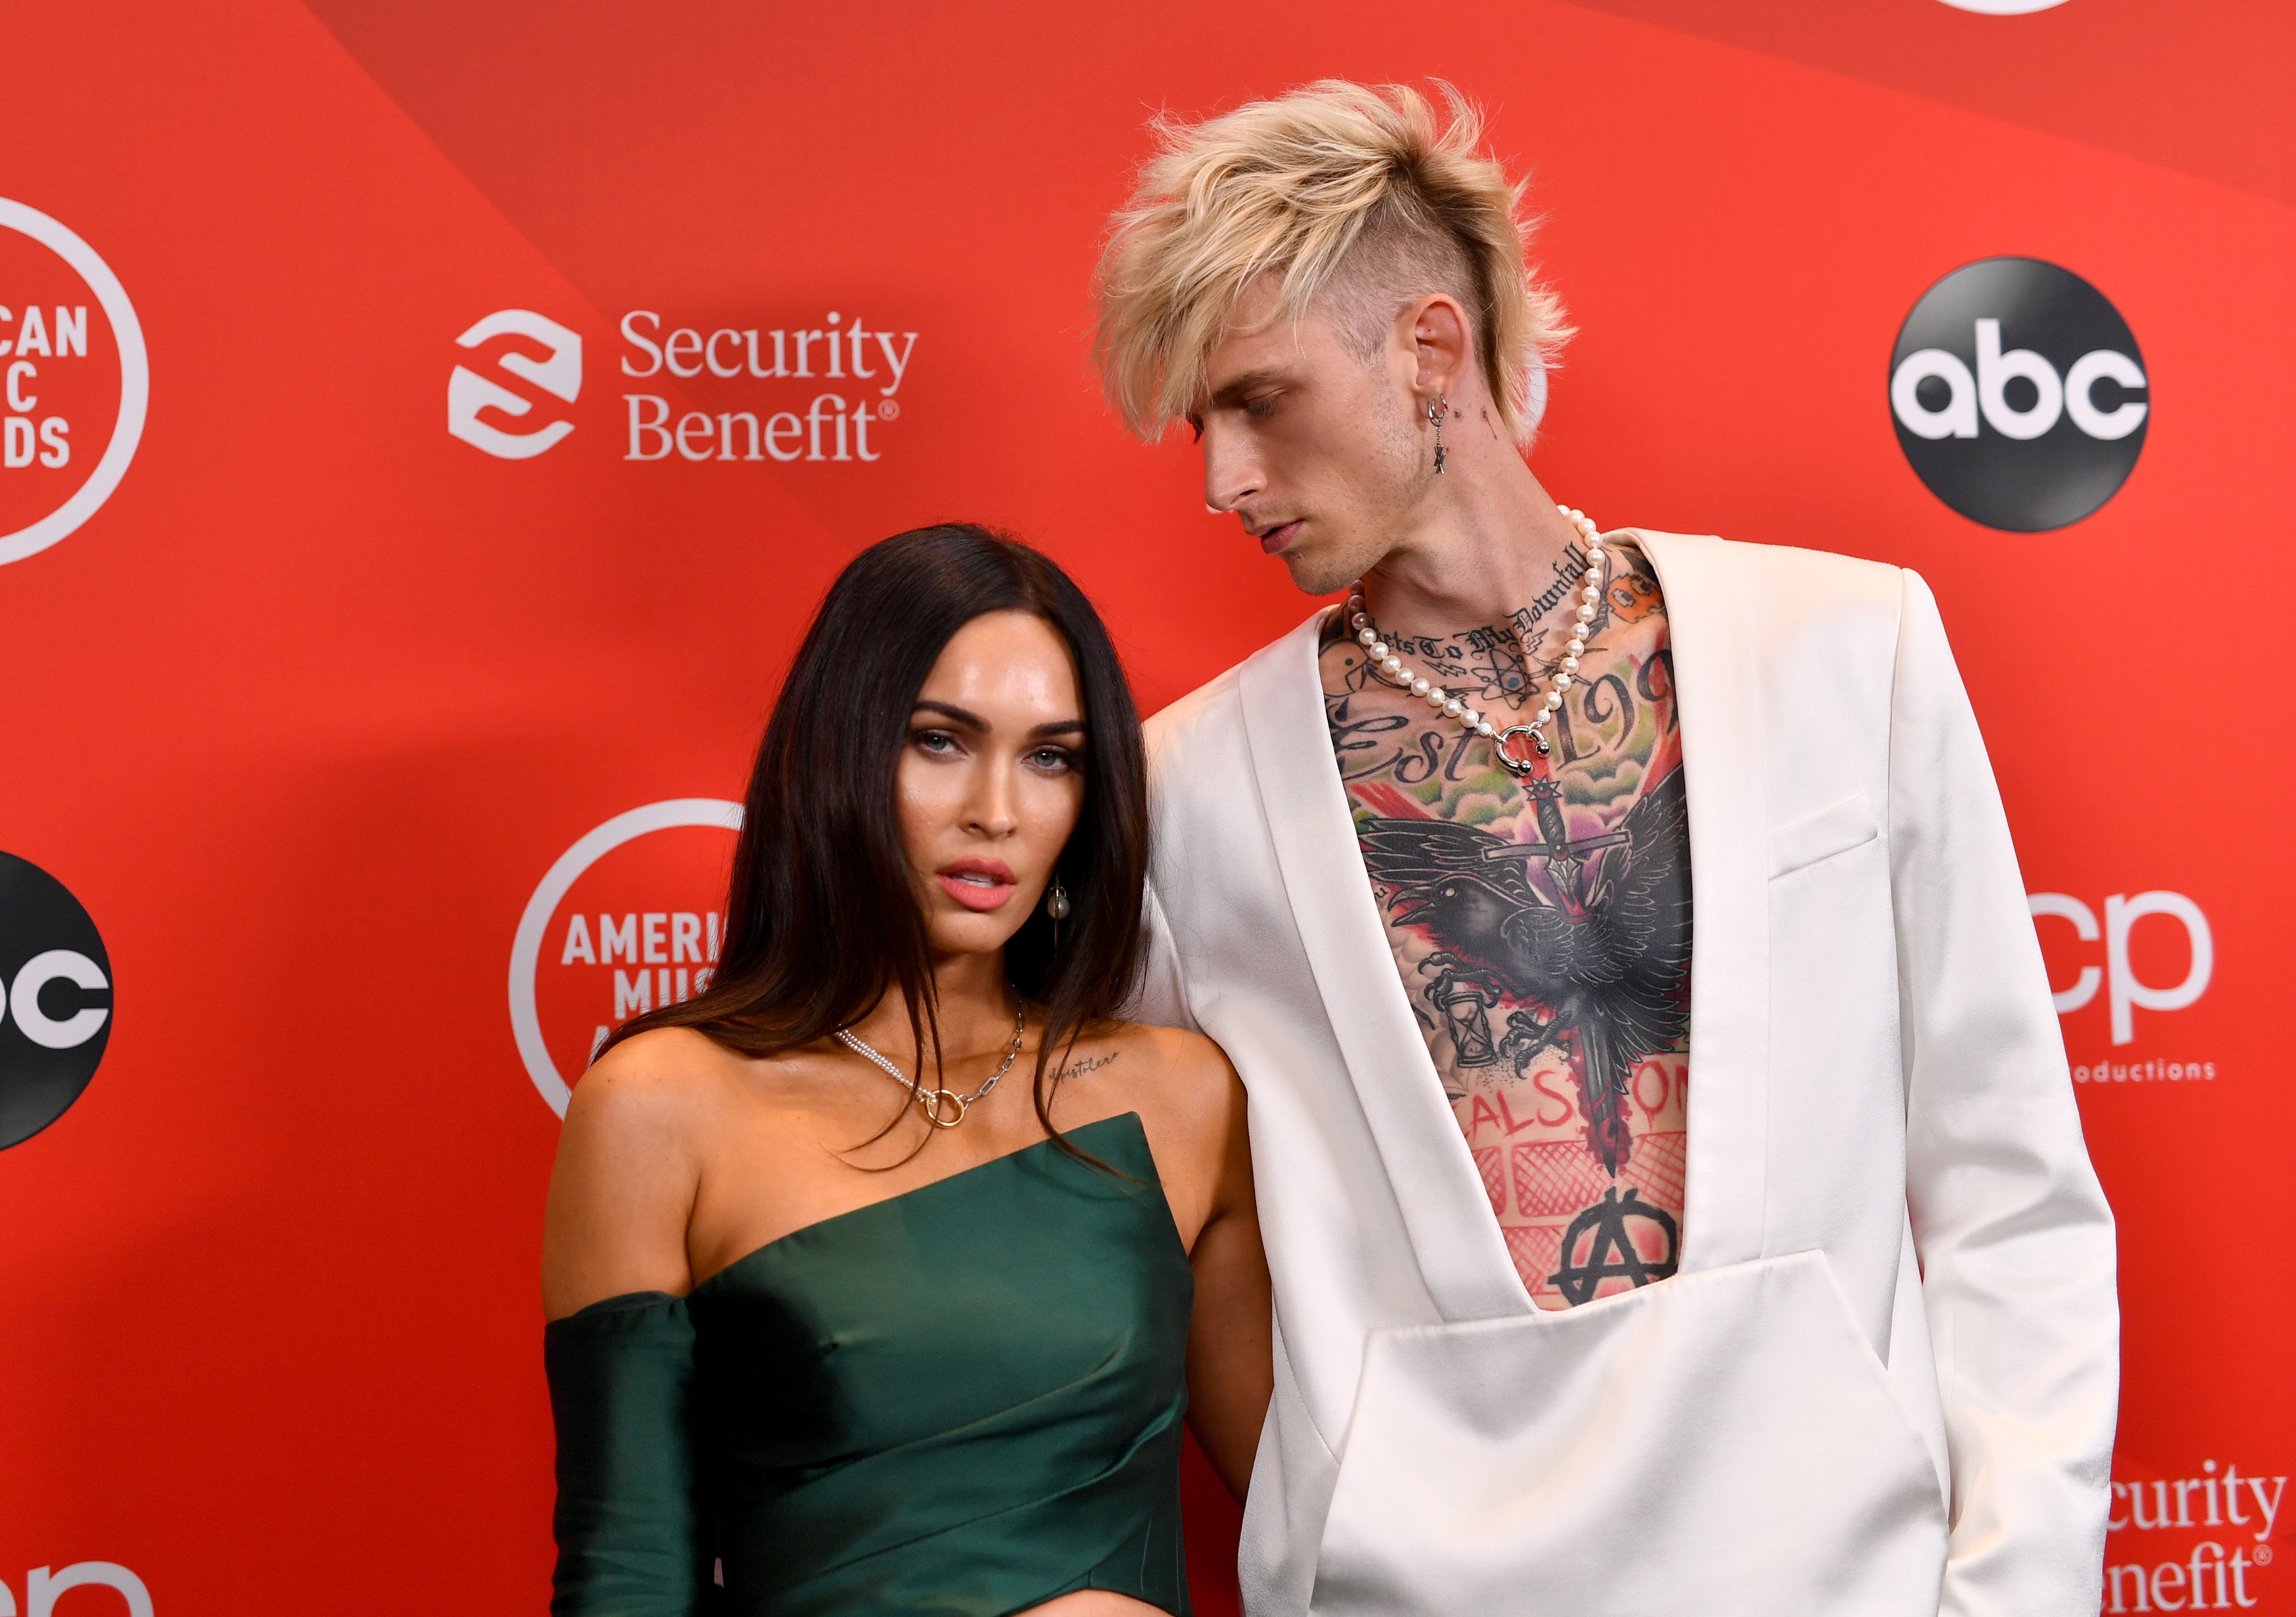 Megan Fox wears a green dress while standing with Machine Gun Kelly, who is wearing a white suit.